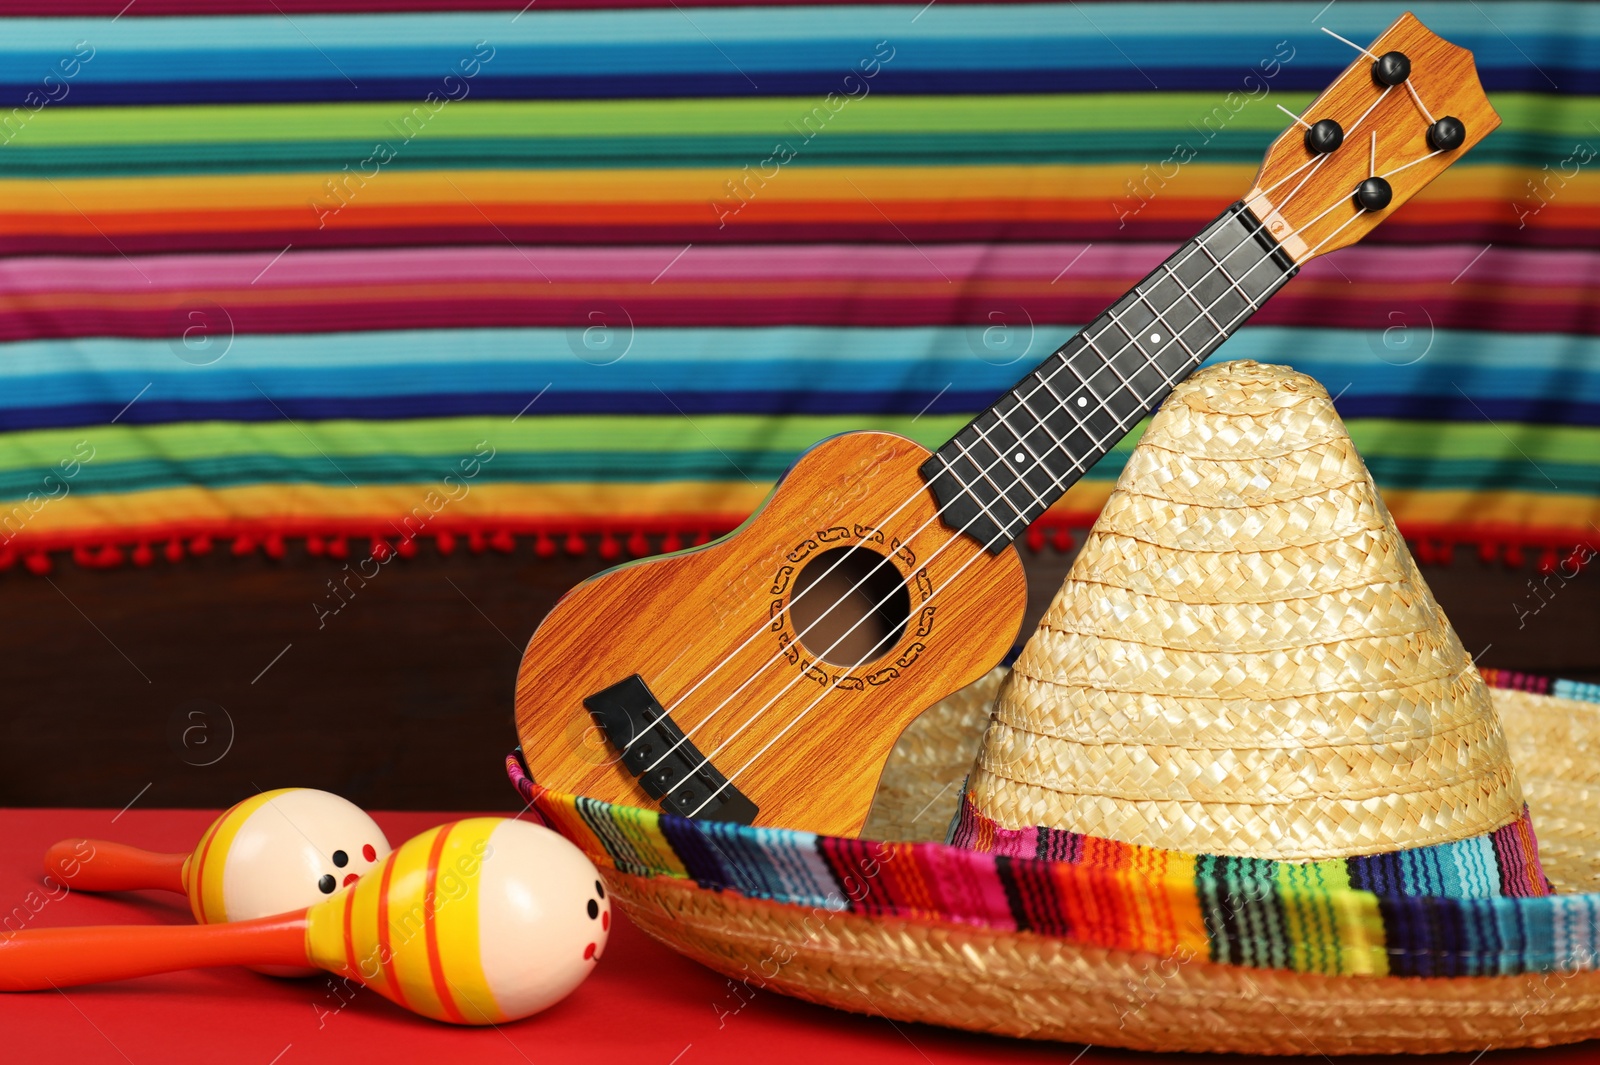 Photo of Mexican sombrero hat, ukulele and maracas on red table, closeup